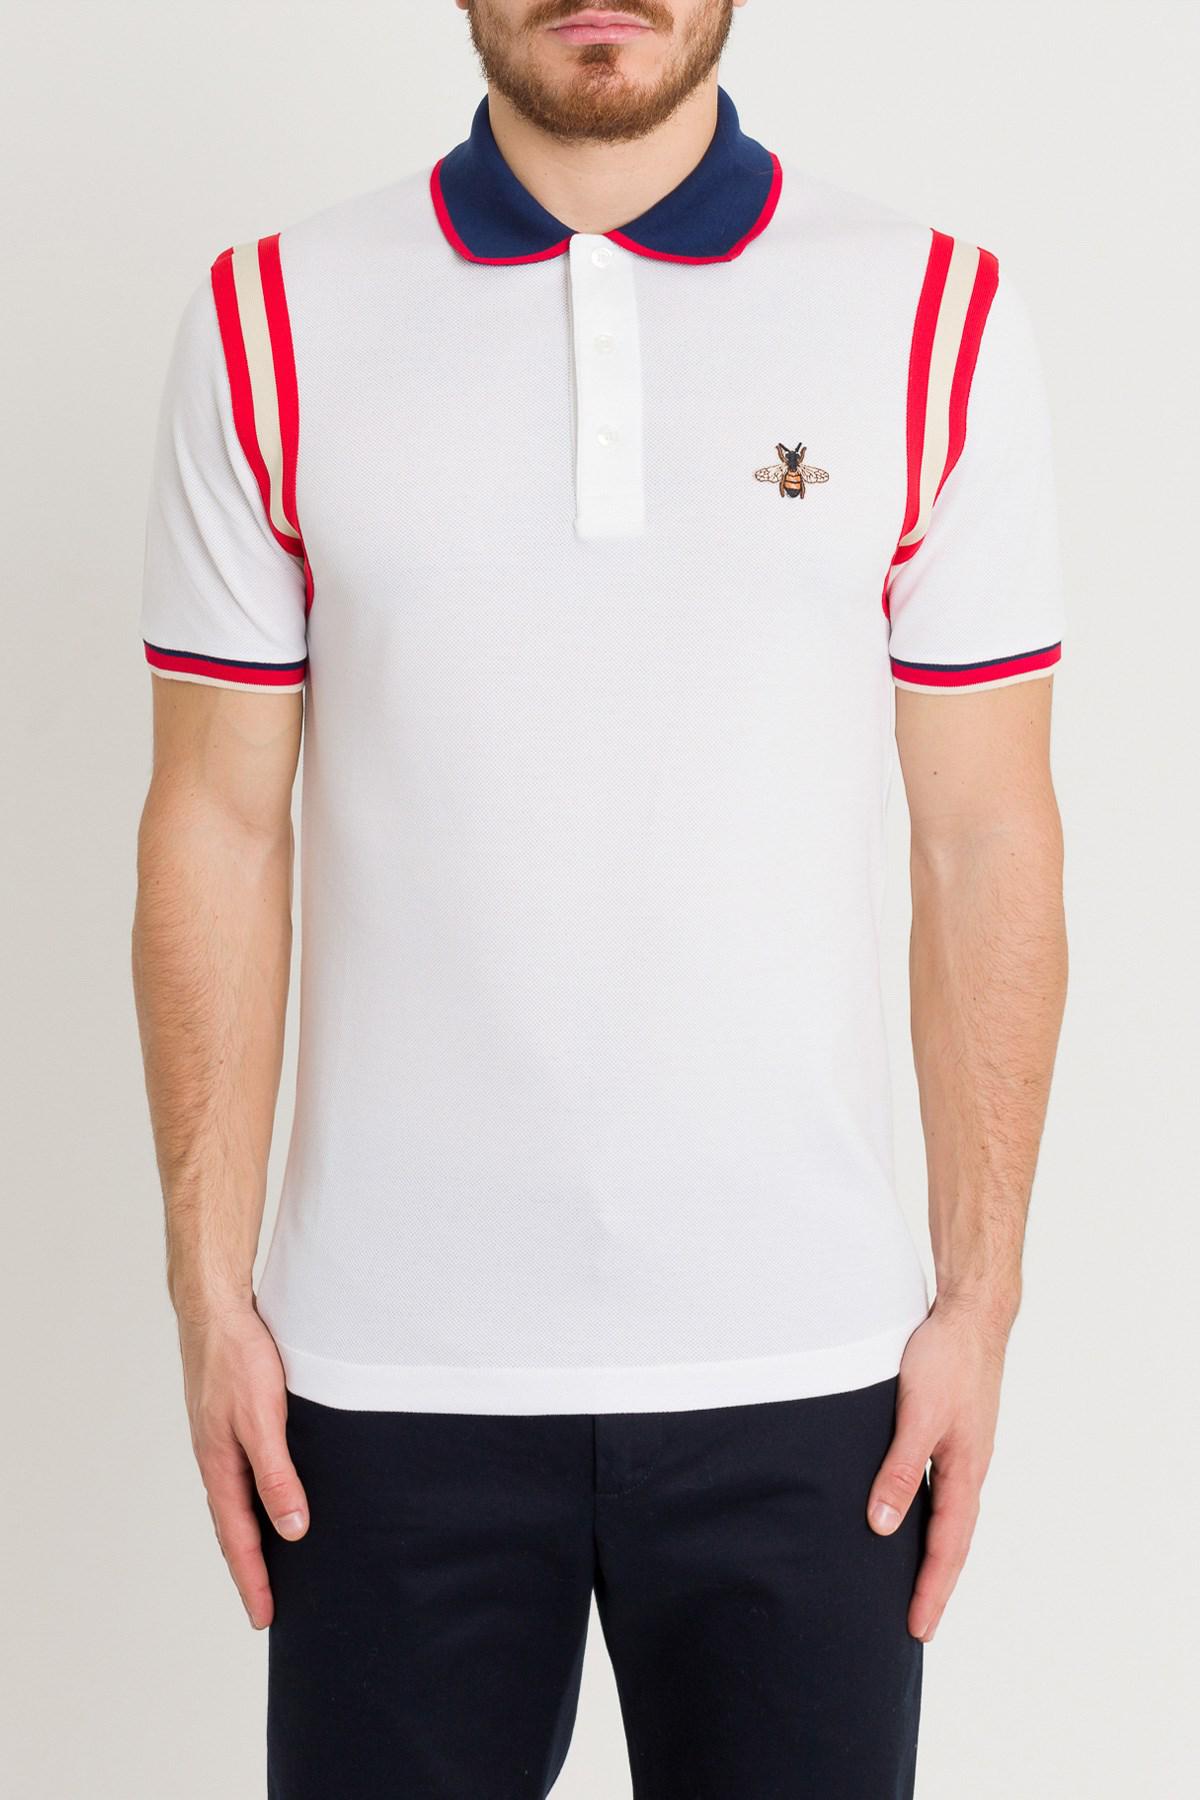 Gucci Polo With Bee in White for Men - Lyst